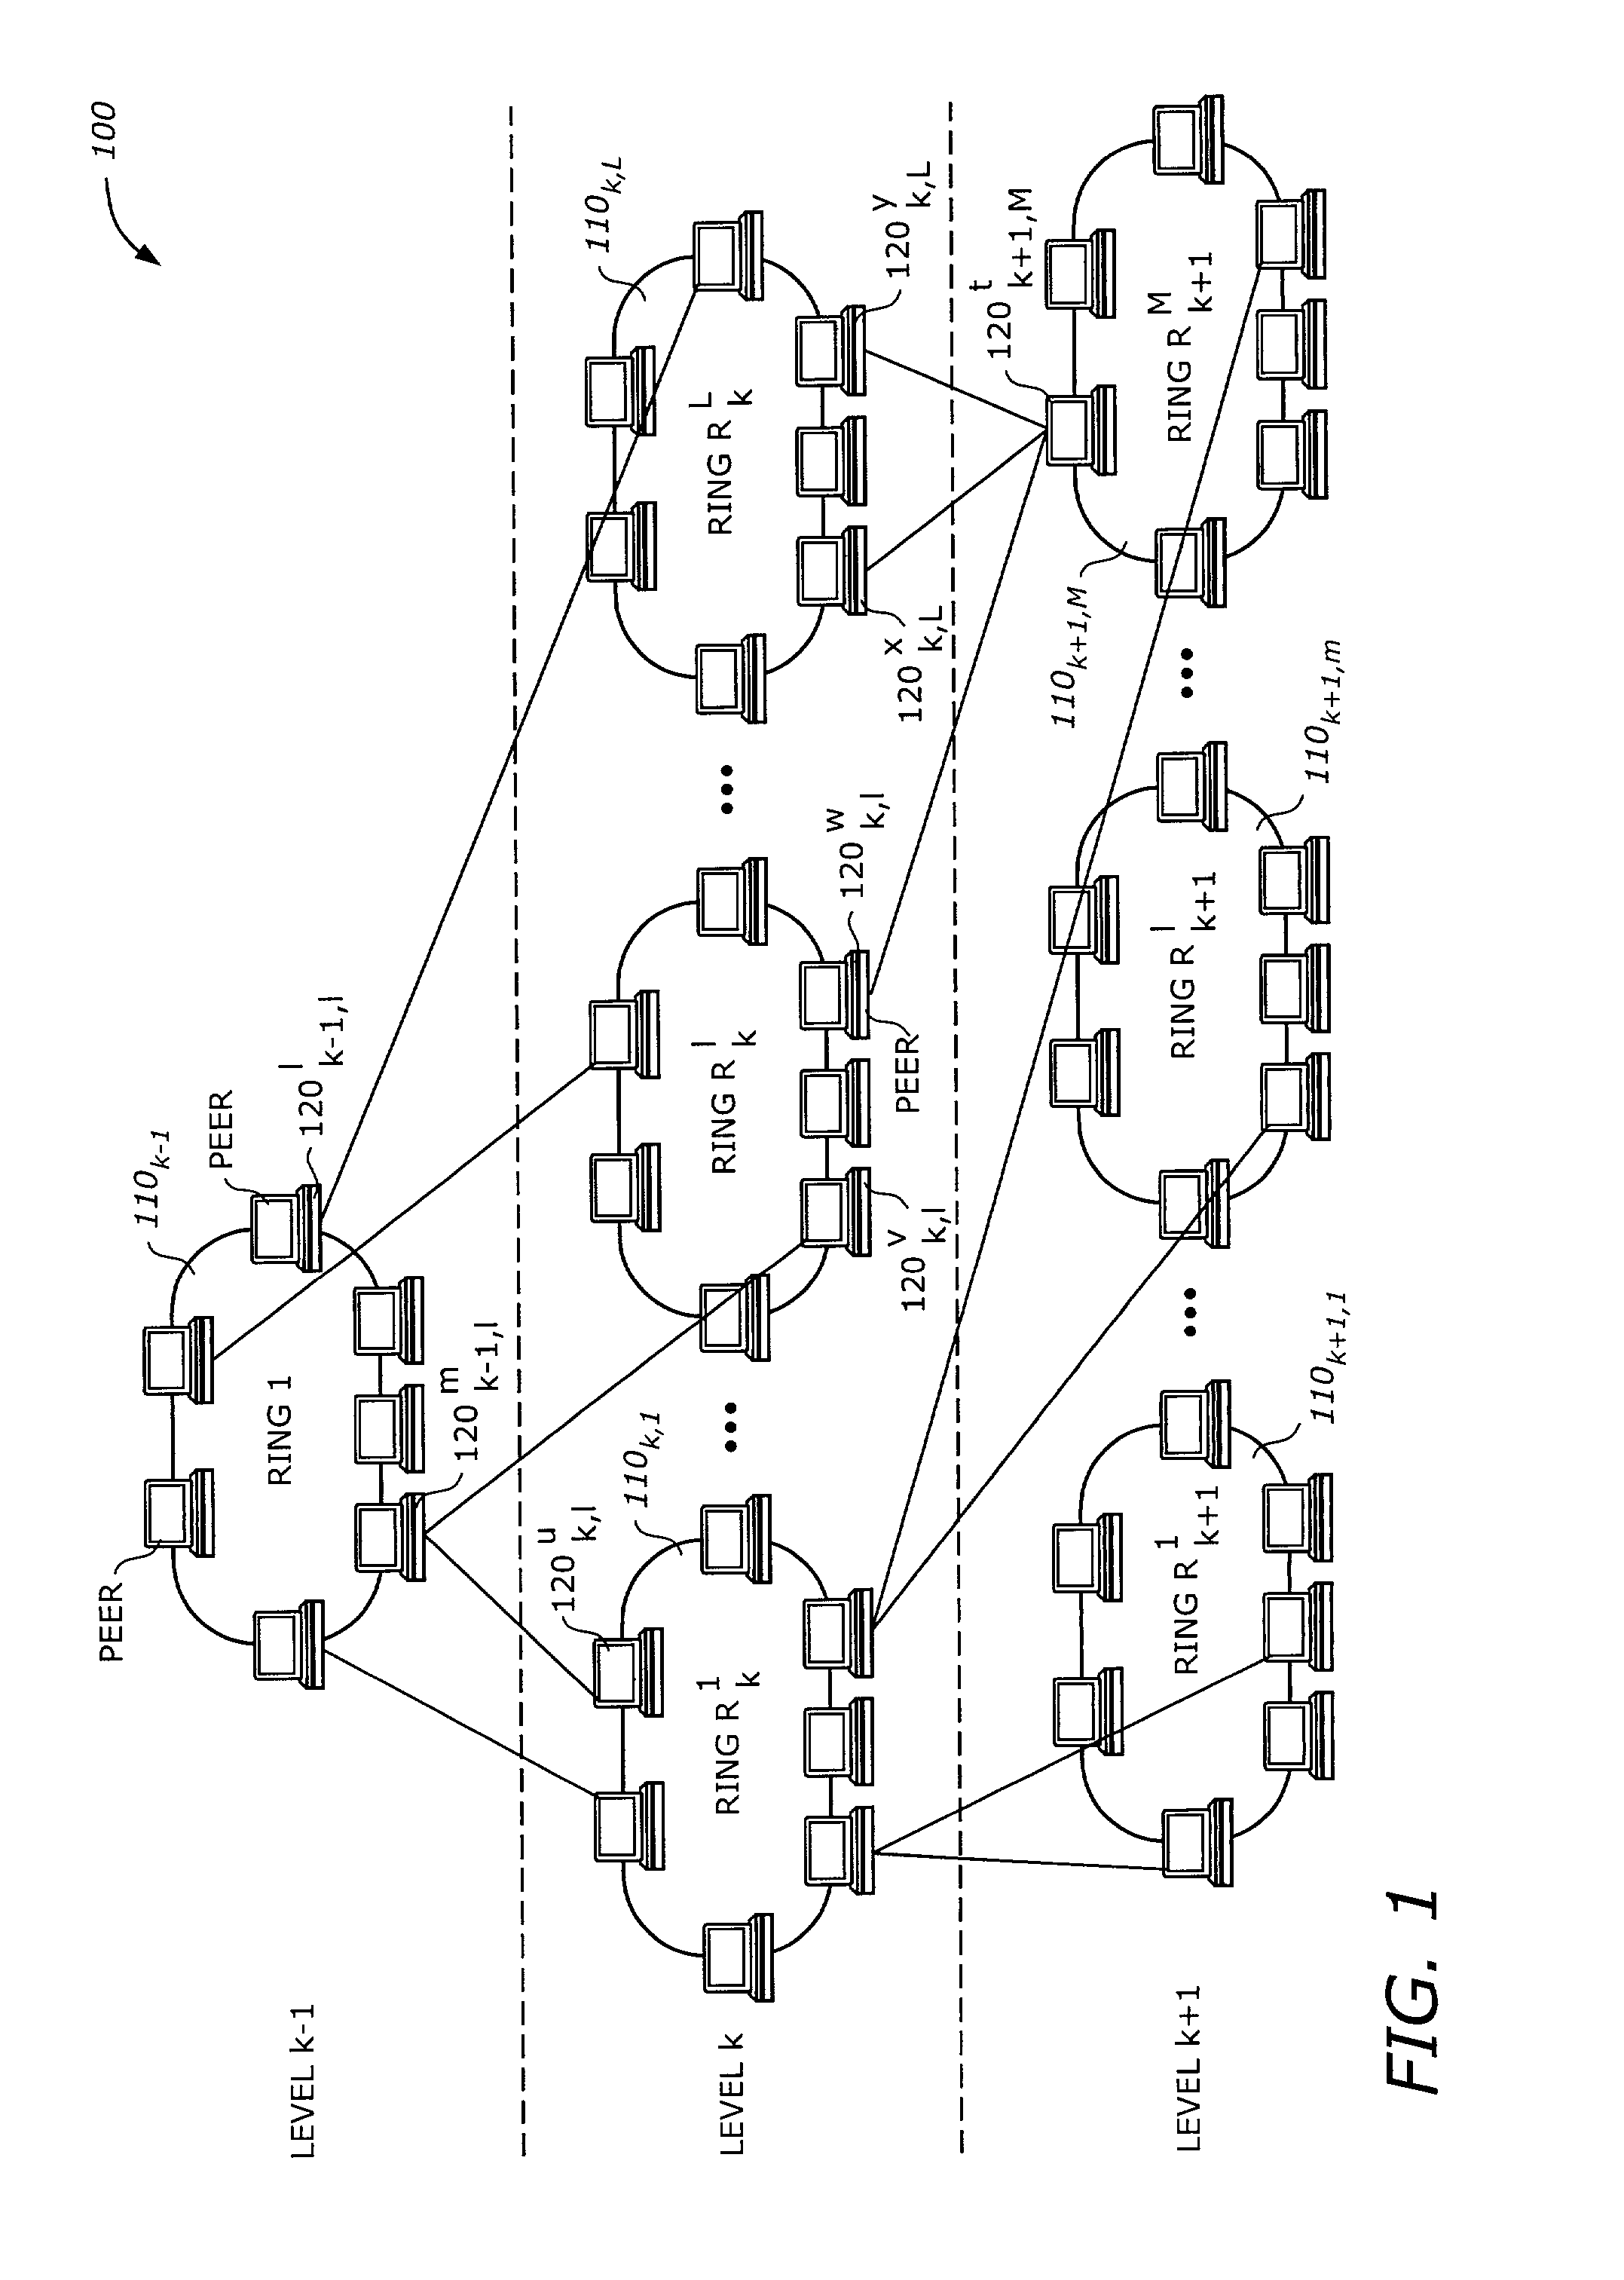 Multi-level ring peer-to-peer network structure for peer and object discovery